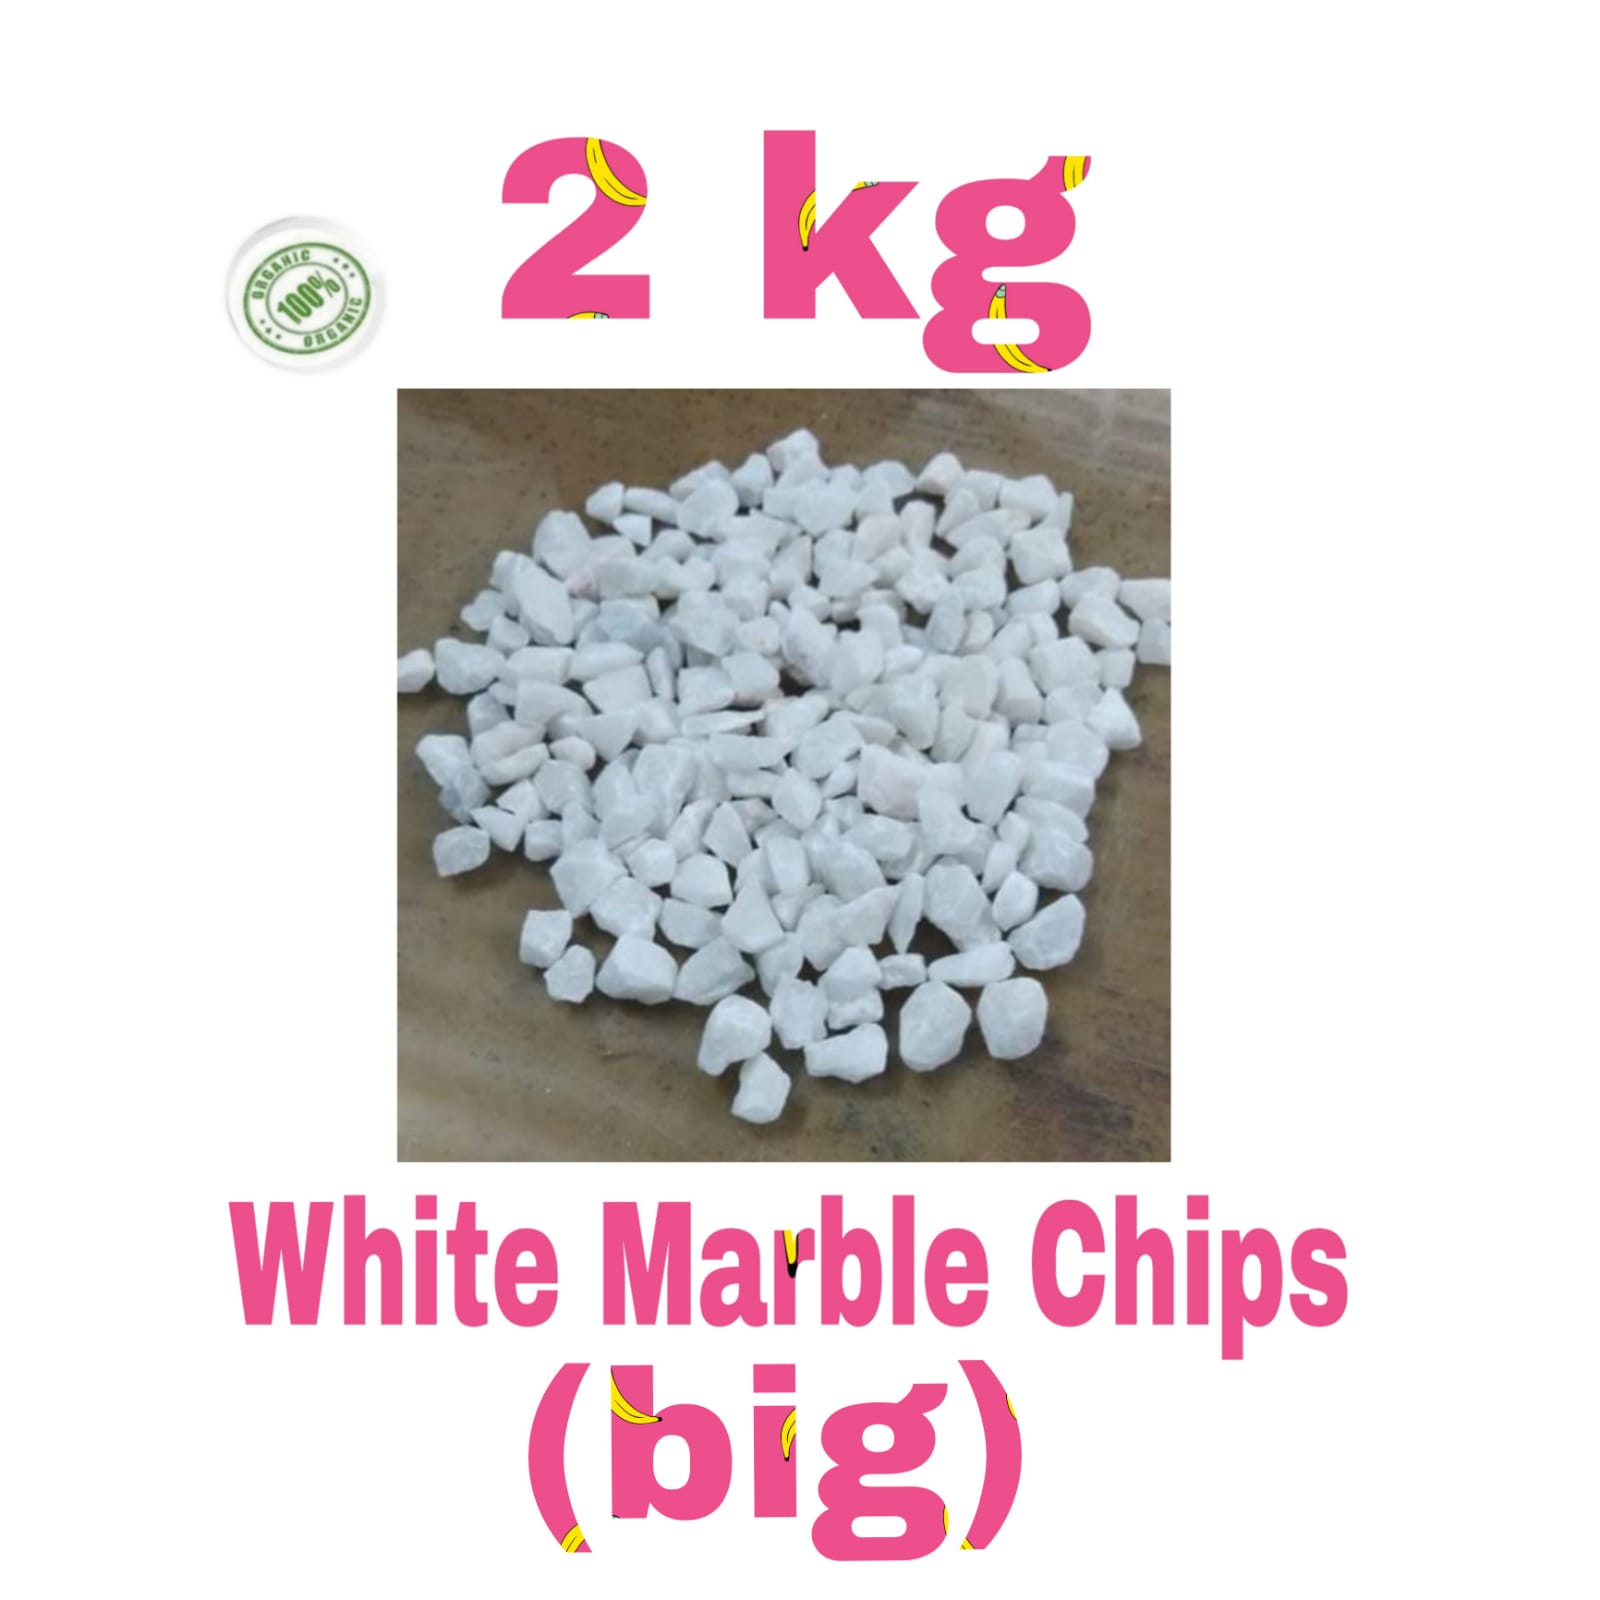 WHITE MARBLE CHIPS (BIG) 2kg